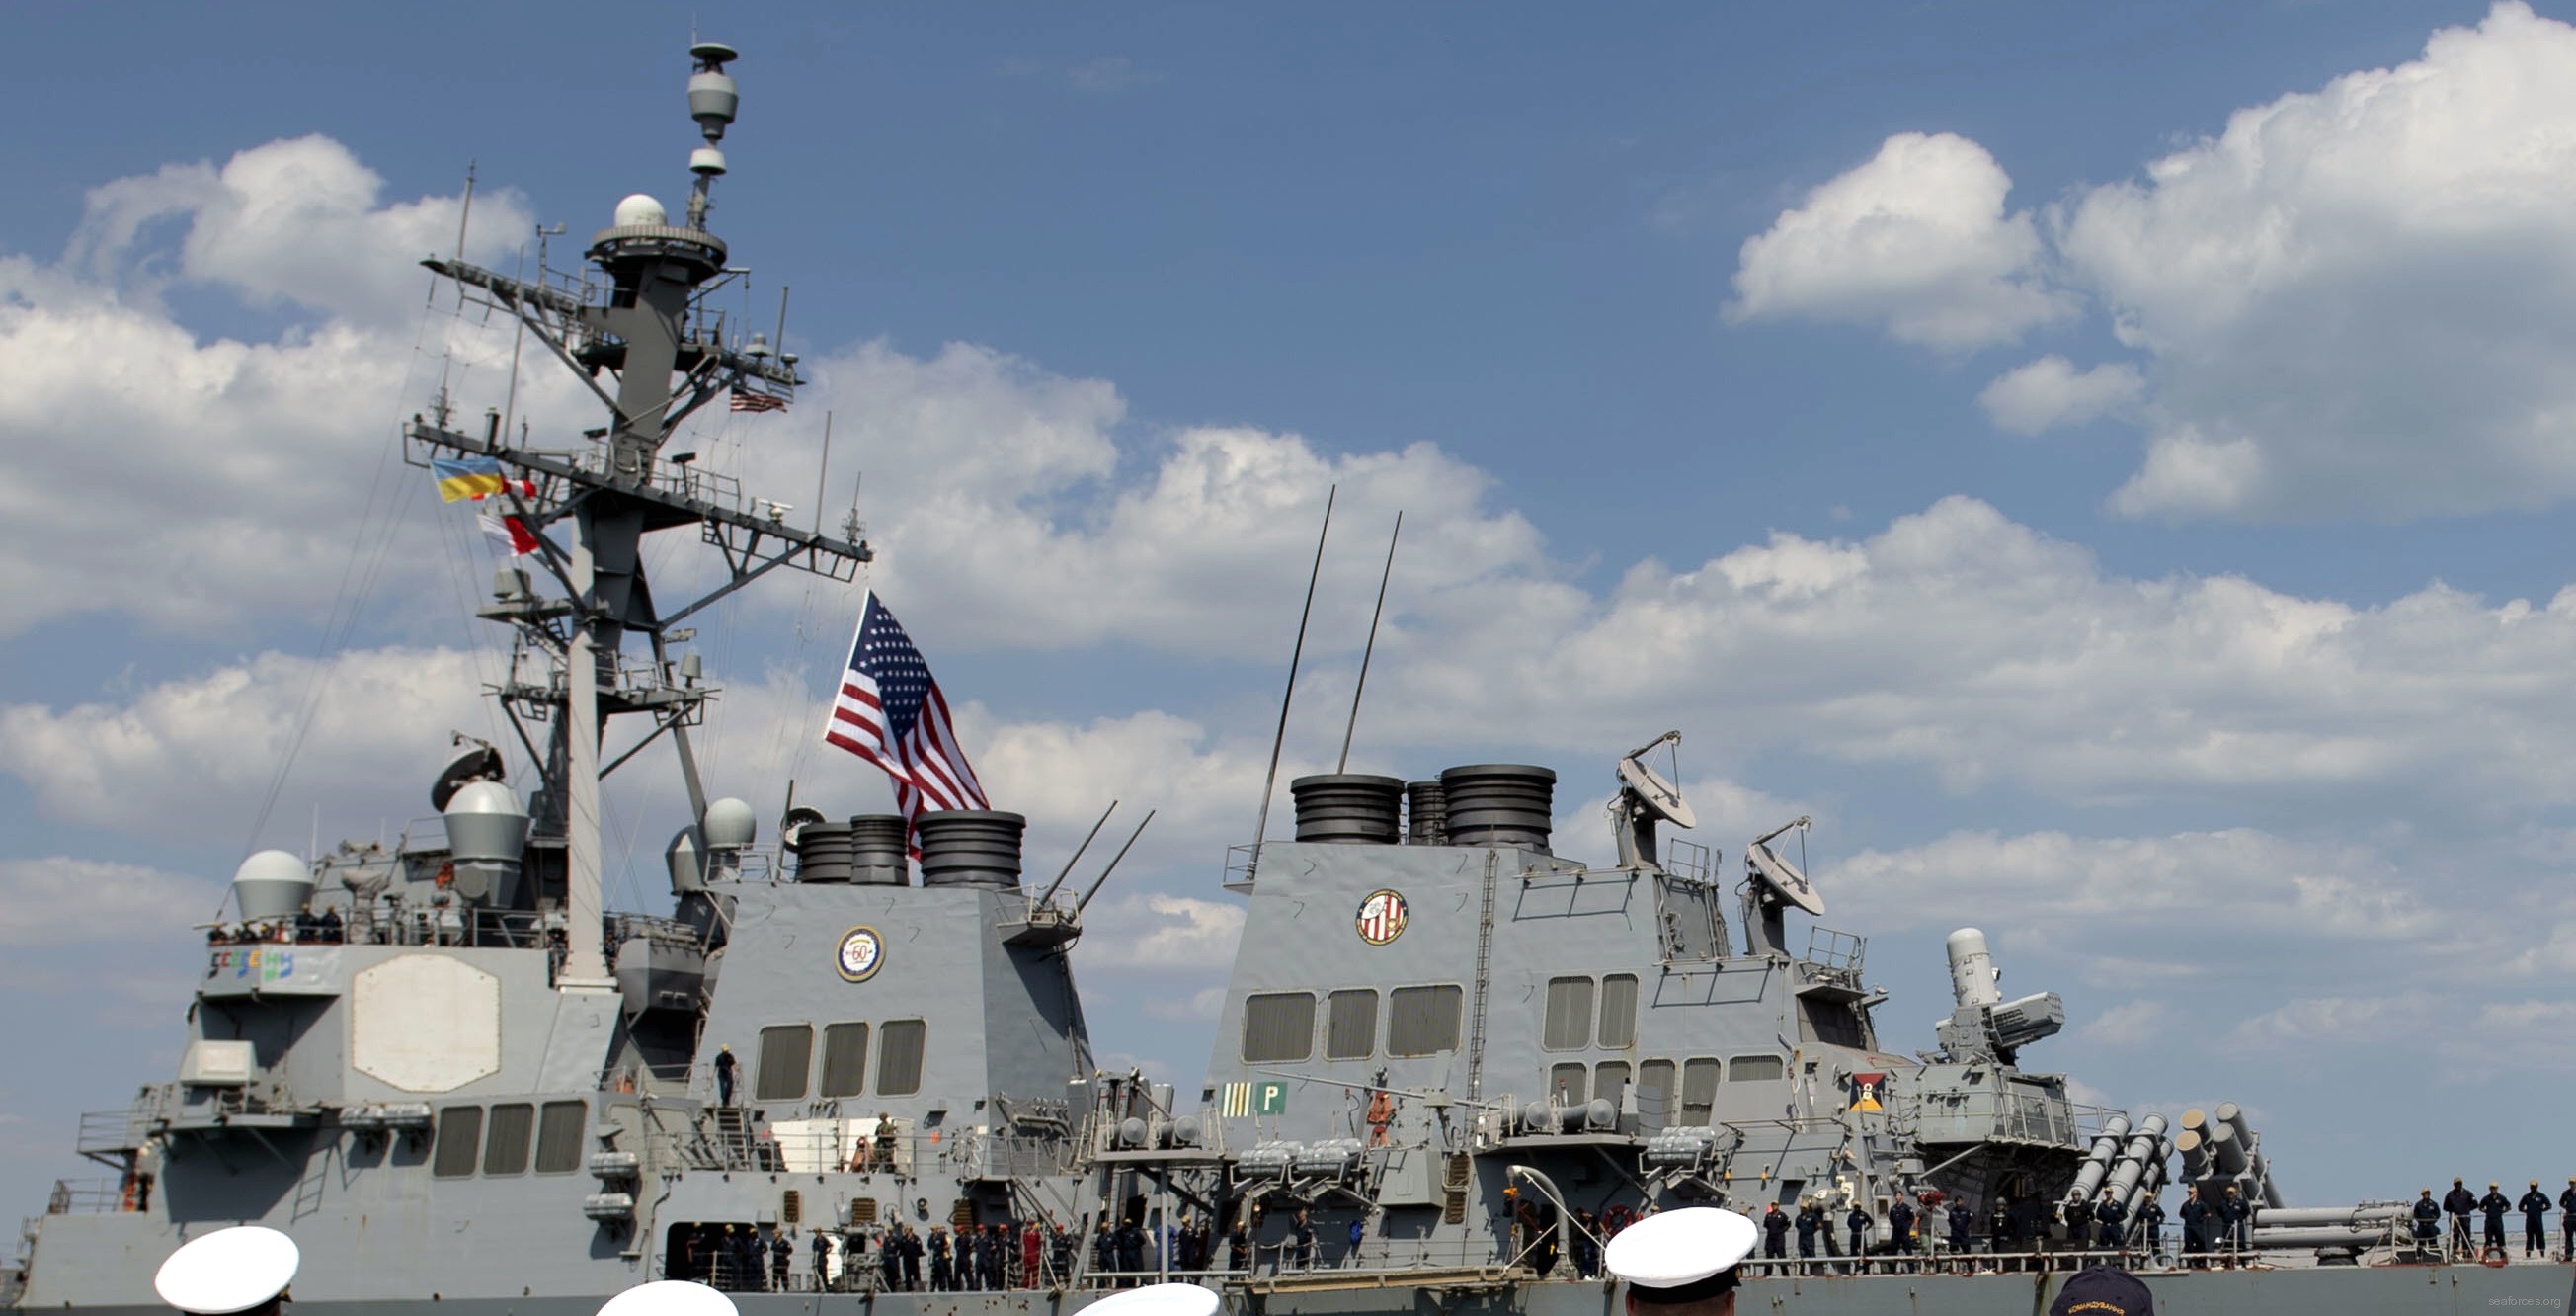 ddg-64 uss carney guided missile destroyer arleigh burke class 111